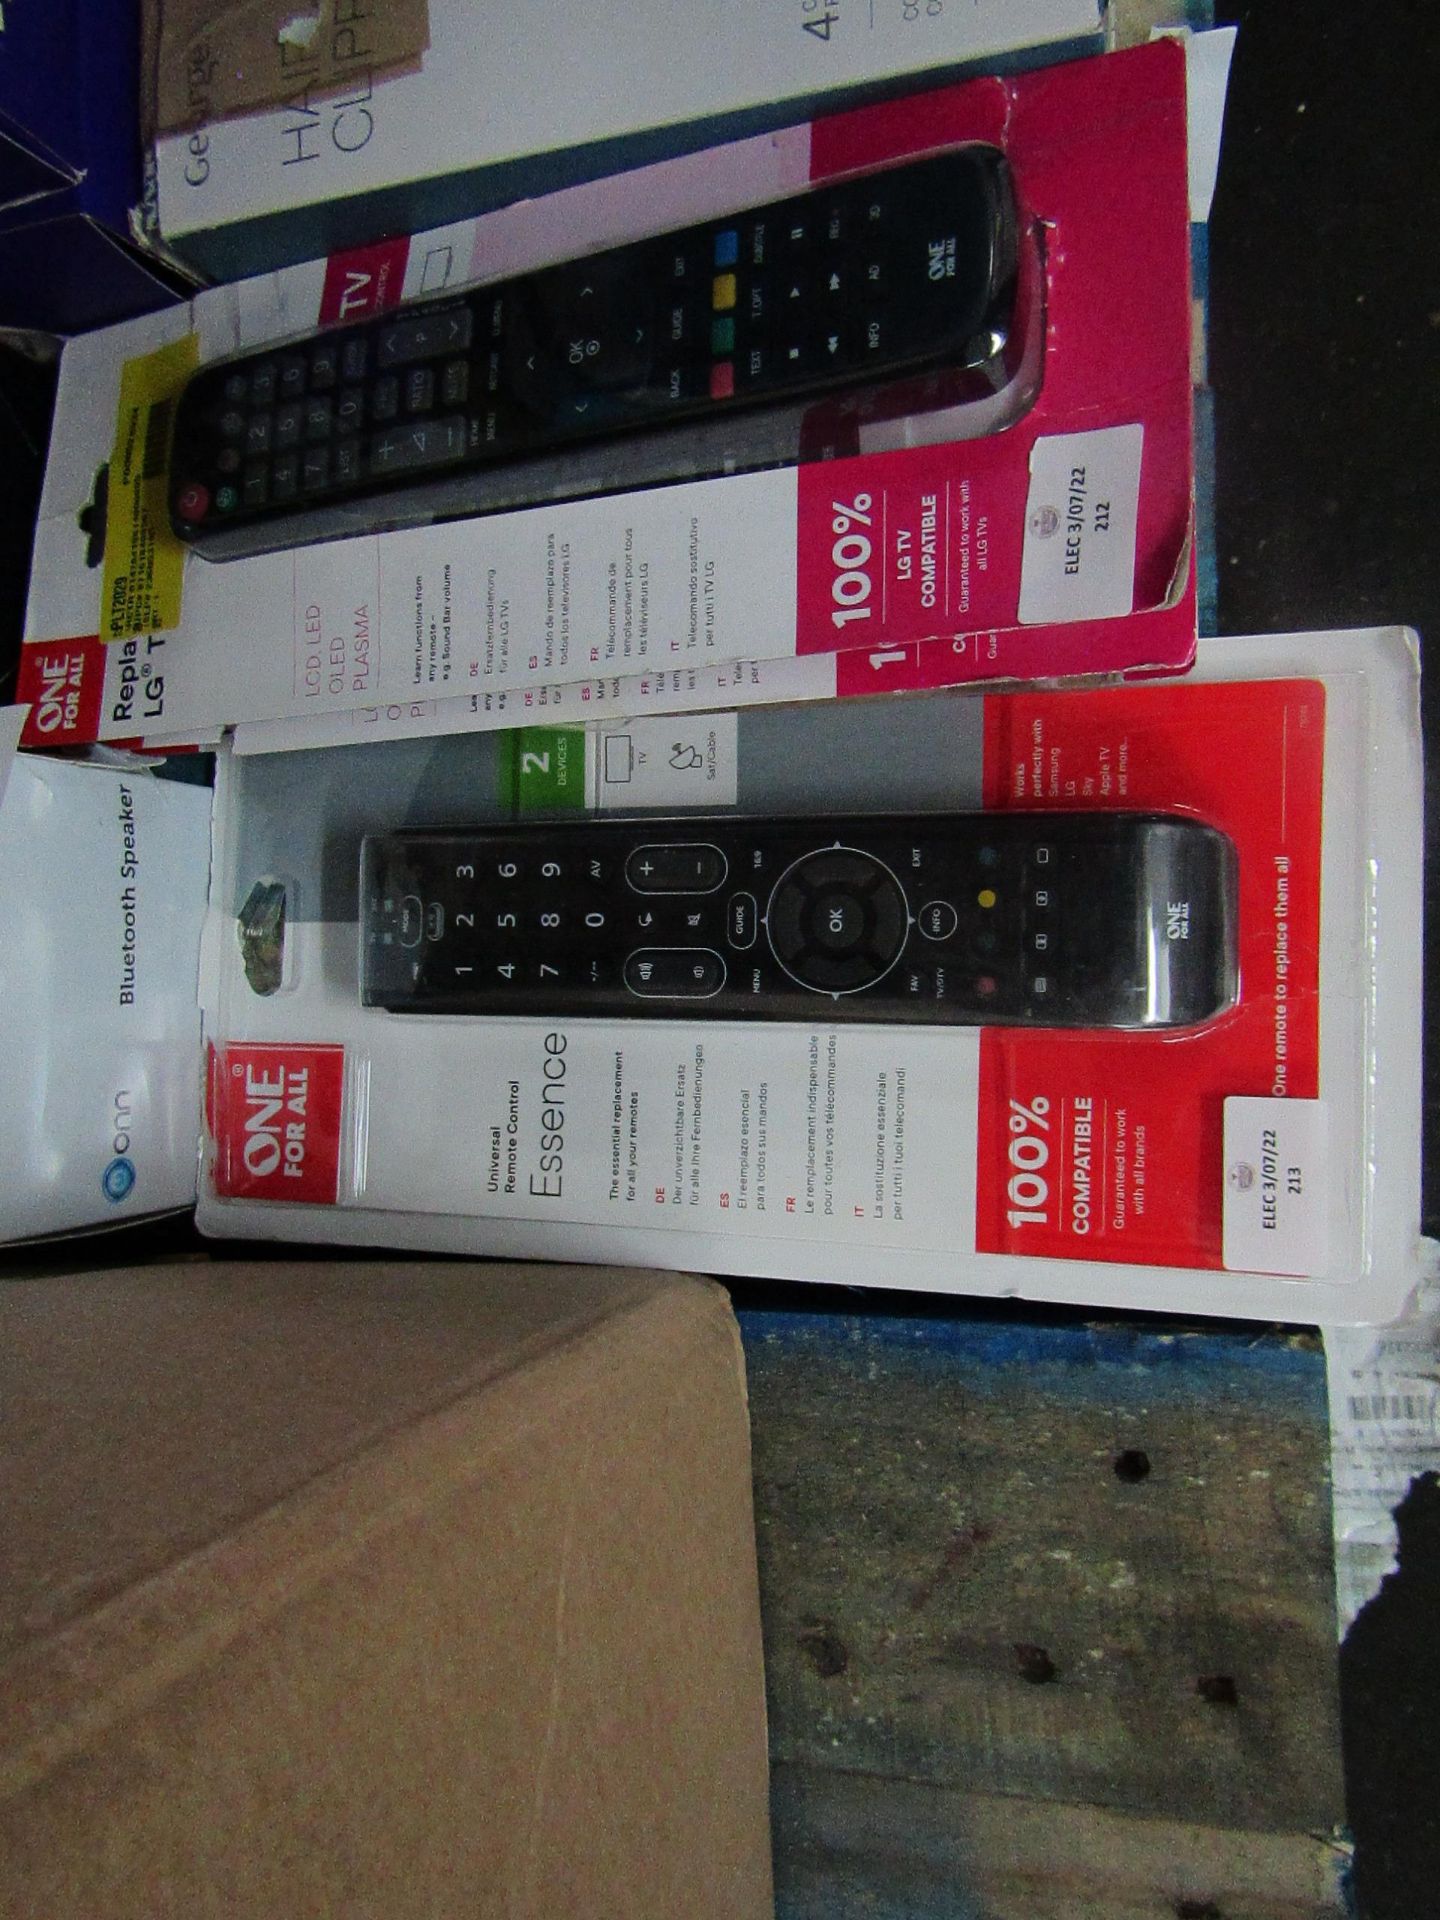 | 1X | ONE FOR ALL UNIVERSAL REMOTE CONTROL BOXED AND UNCHECKED RETURN | LOAD REF ASF-DIR-031 |